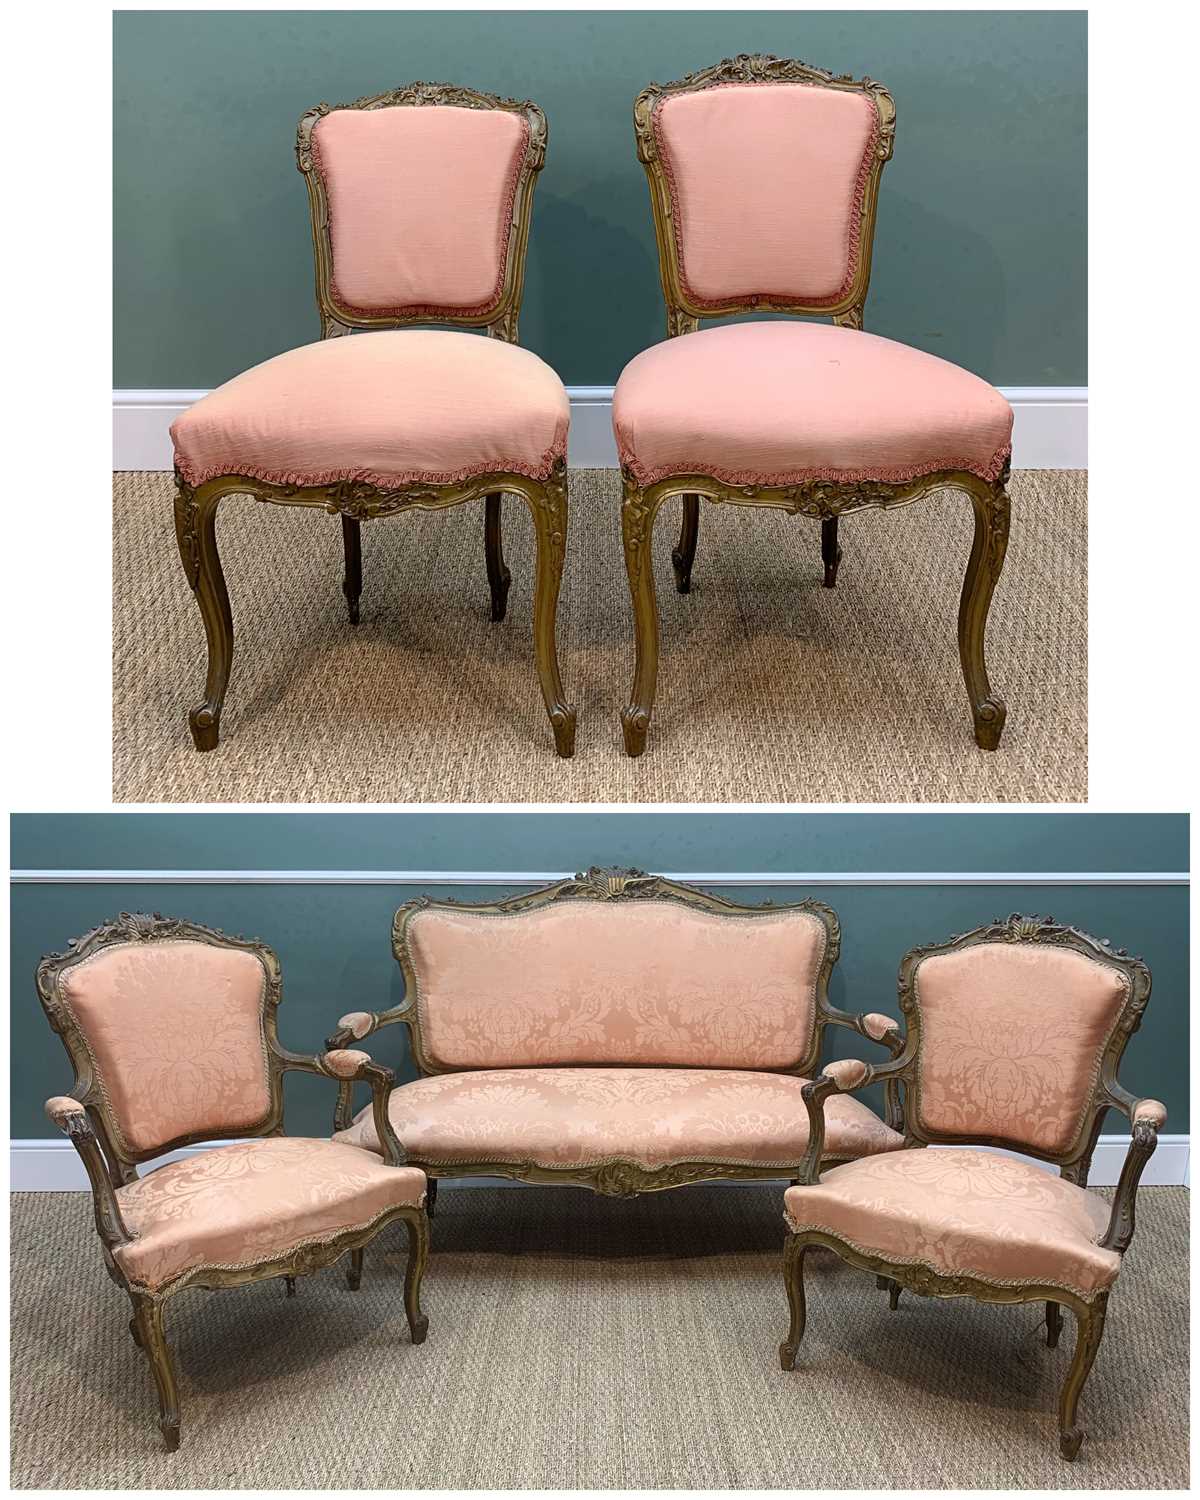 LOUIS XV-STYLE GILTWOOD SALON SUITE, comprising canape and pair of fauteuils, apricot damask